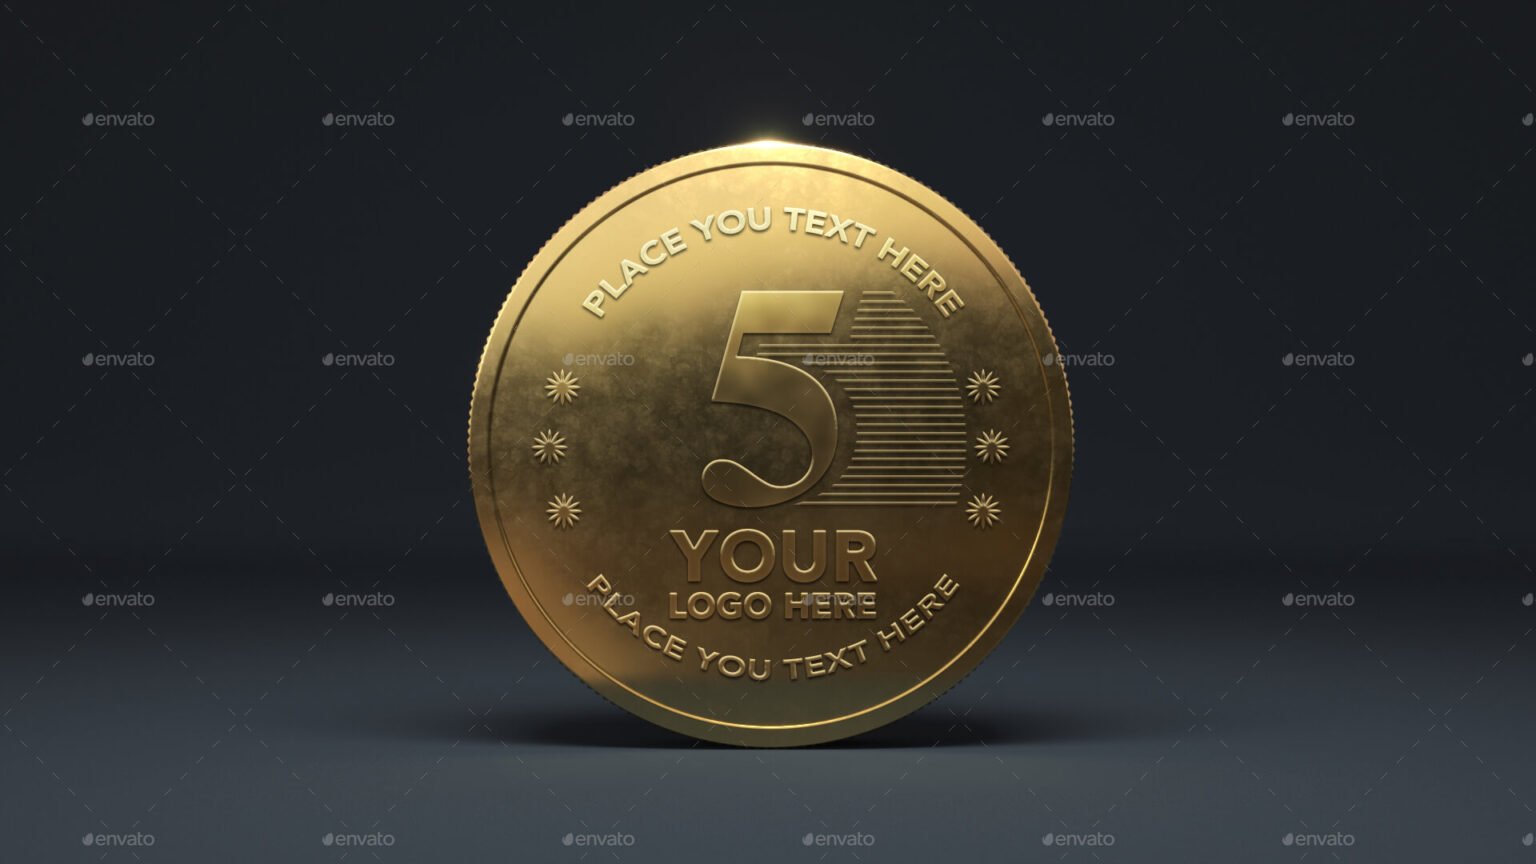 17+ Authentic Coin Mockup PSD Templates - Mockup Den